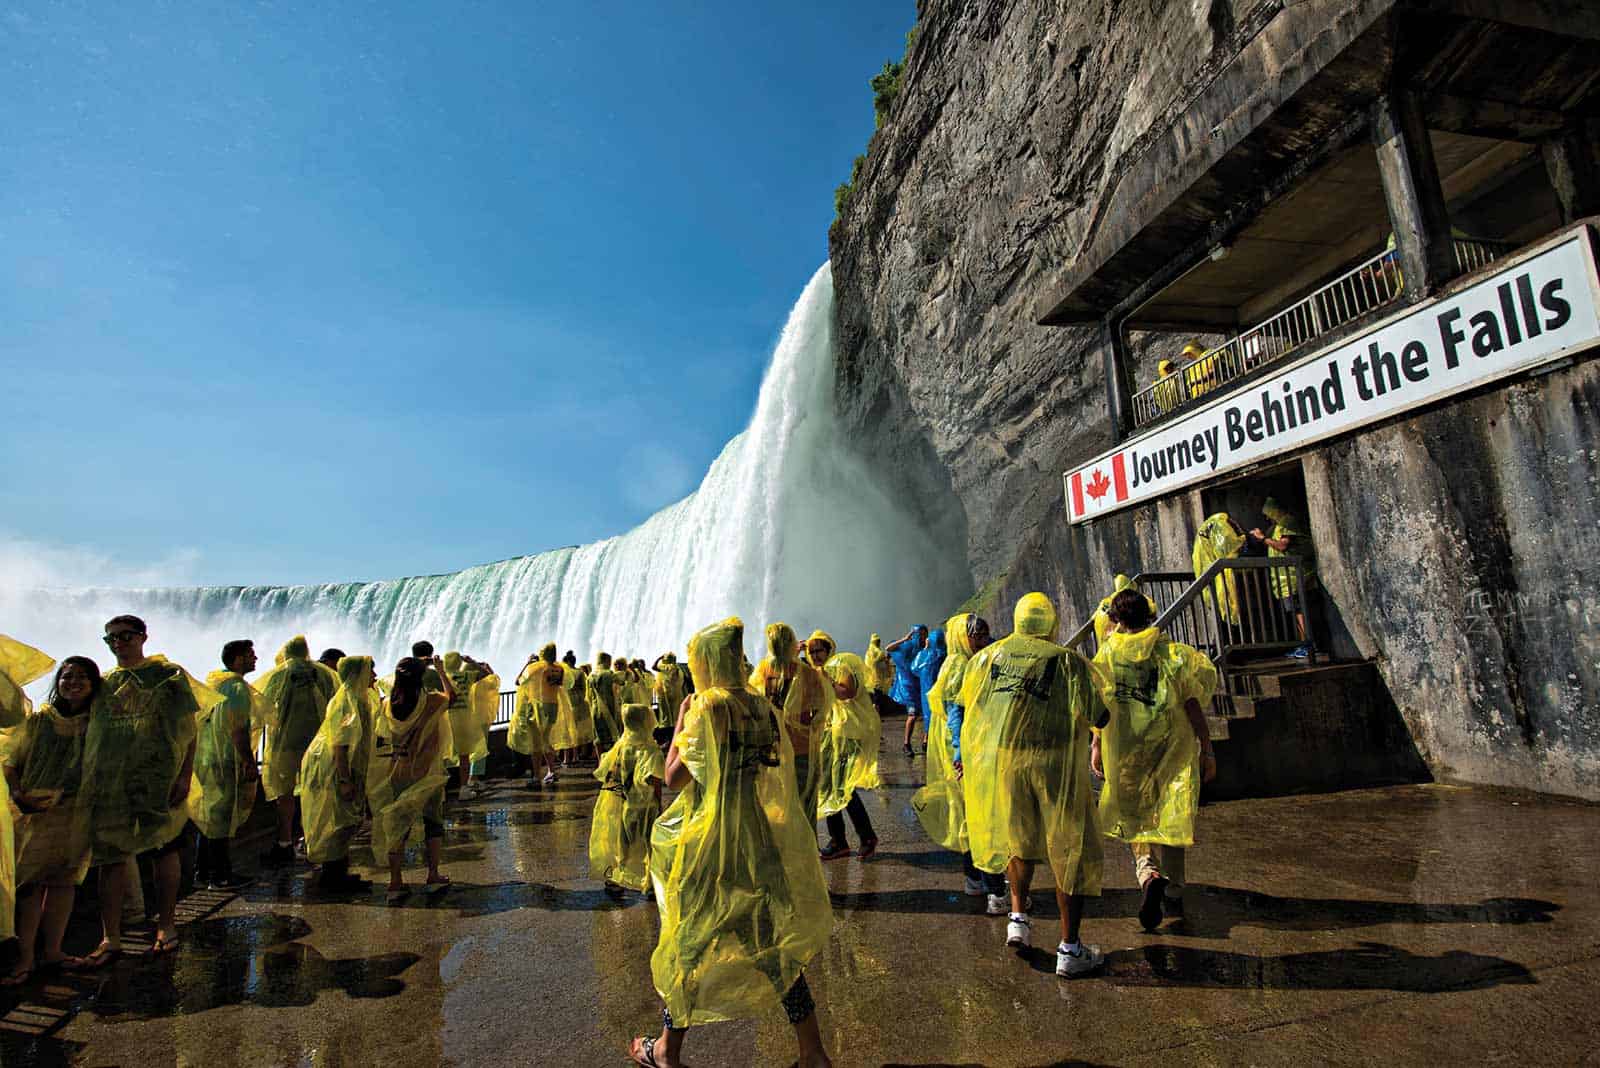 is journey behind the falls wheelchair accessible